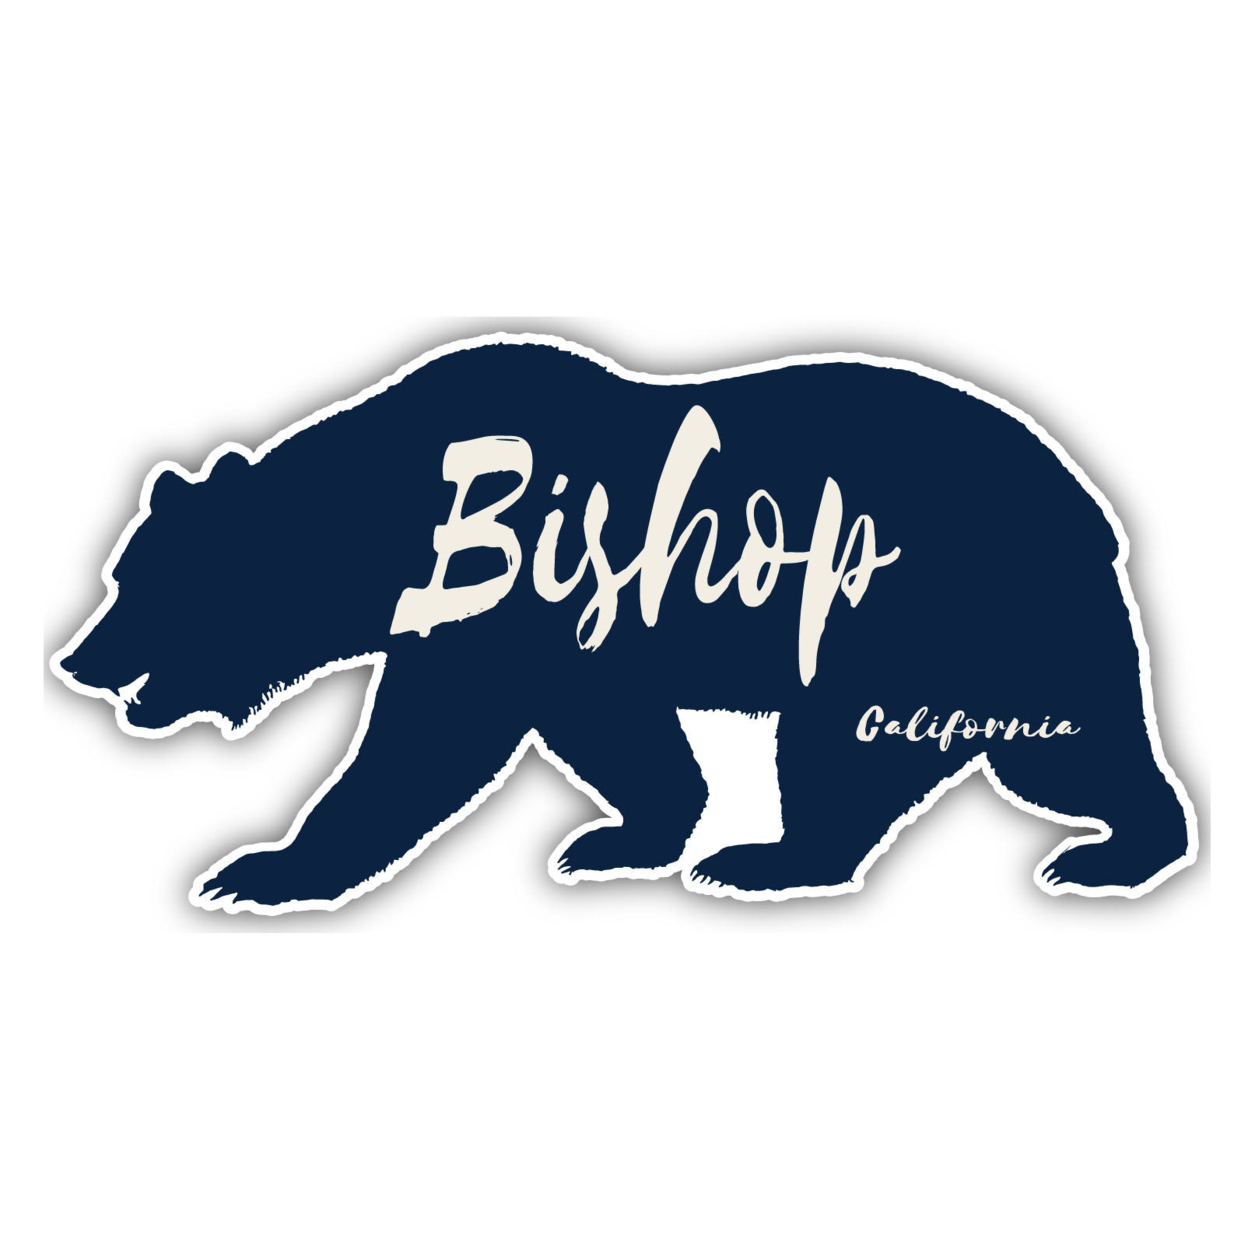 Bishop California Souvenir Decorative Stickers (Choose Theme And Size) - 4-Pack, 10-Inch, Bear